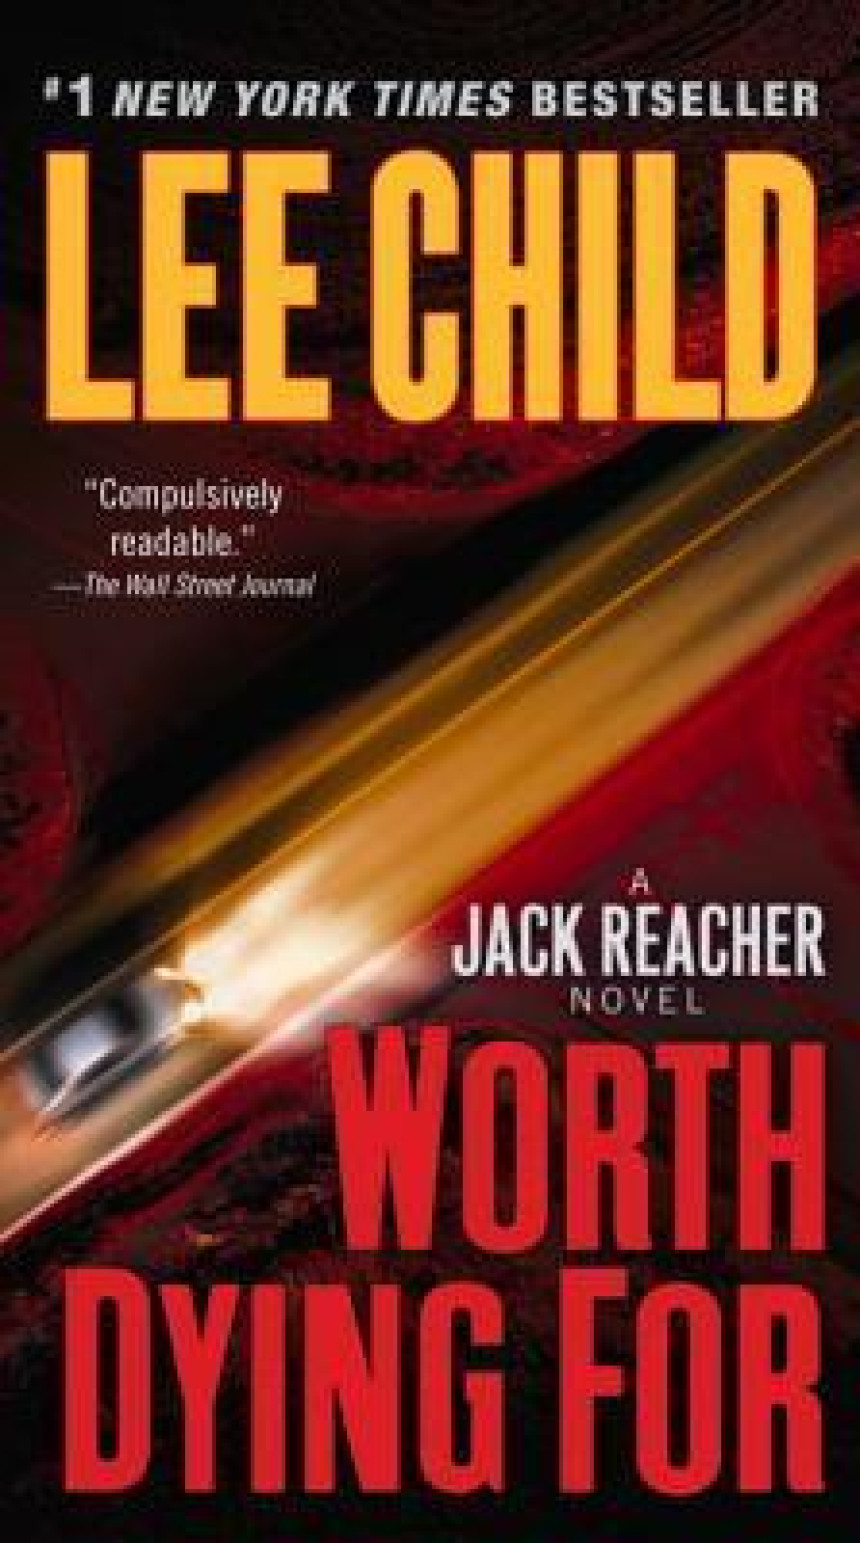 Free Download Jack Reacher #15 Worth Dying For by Lee Child